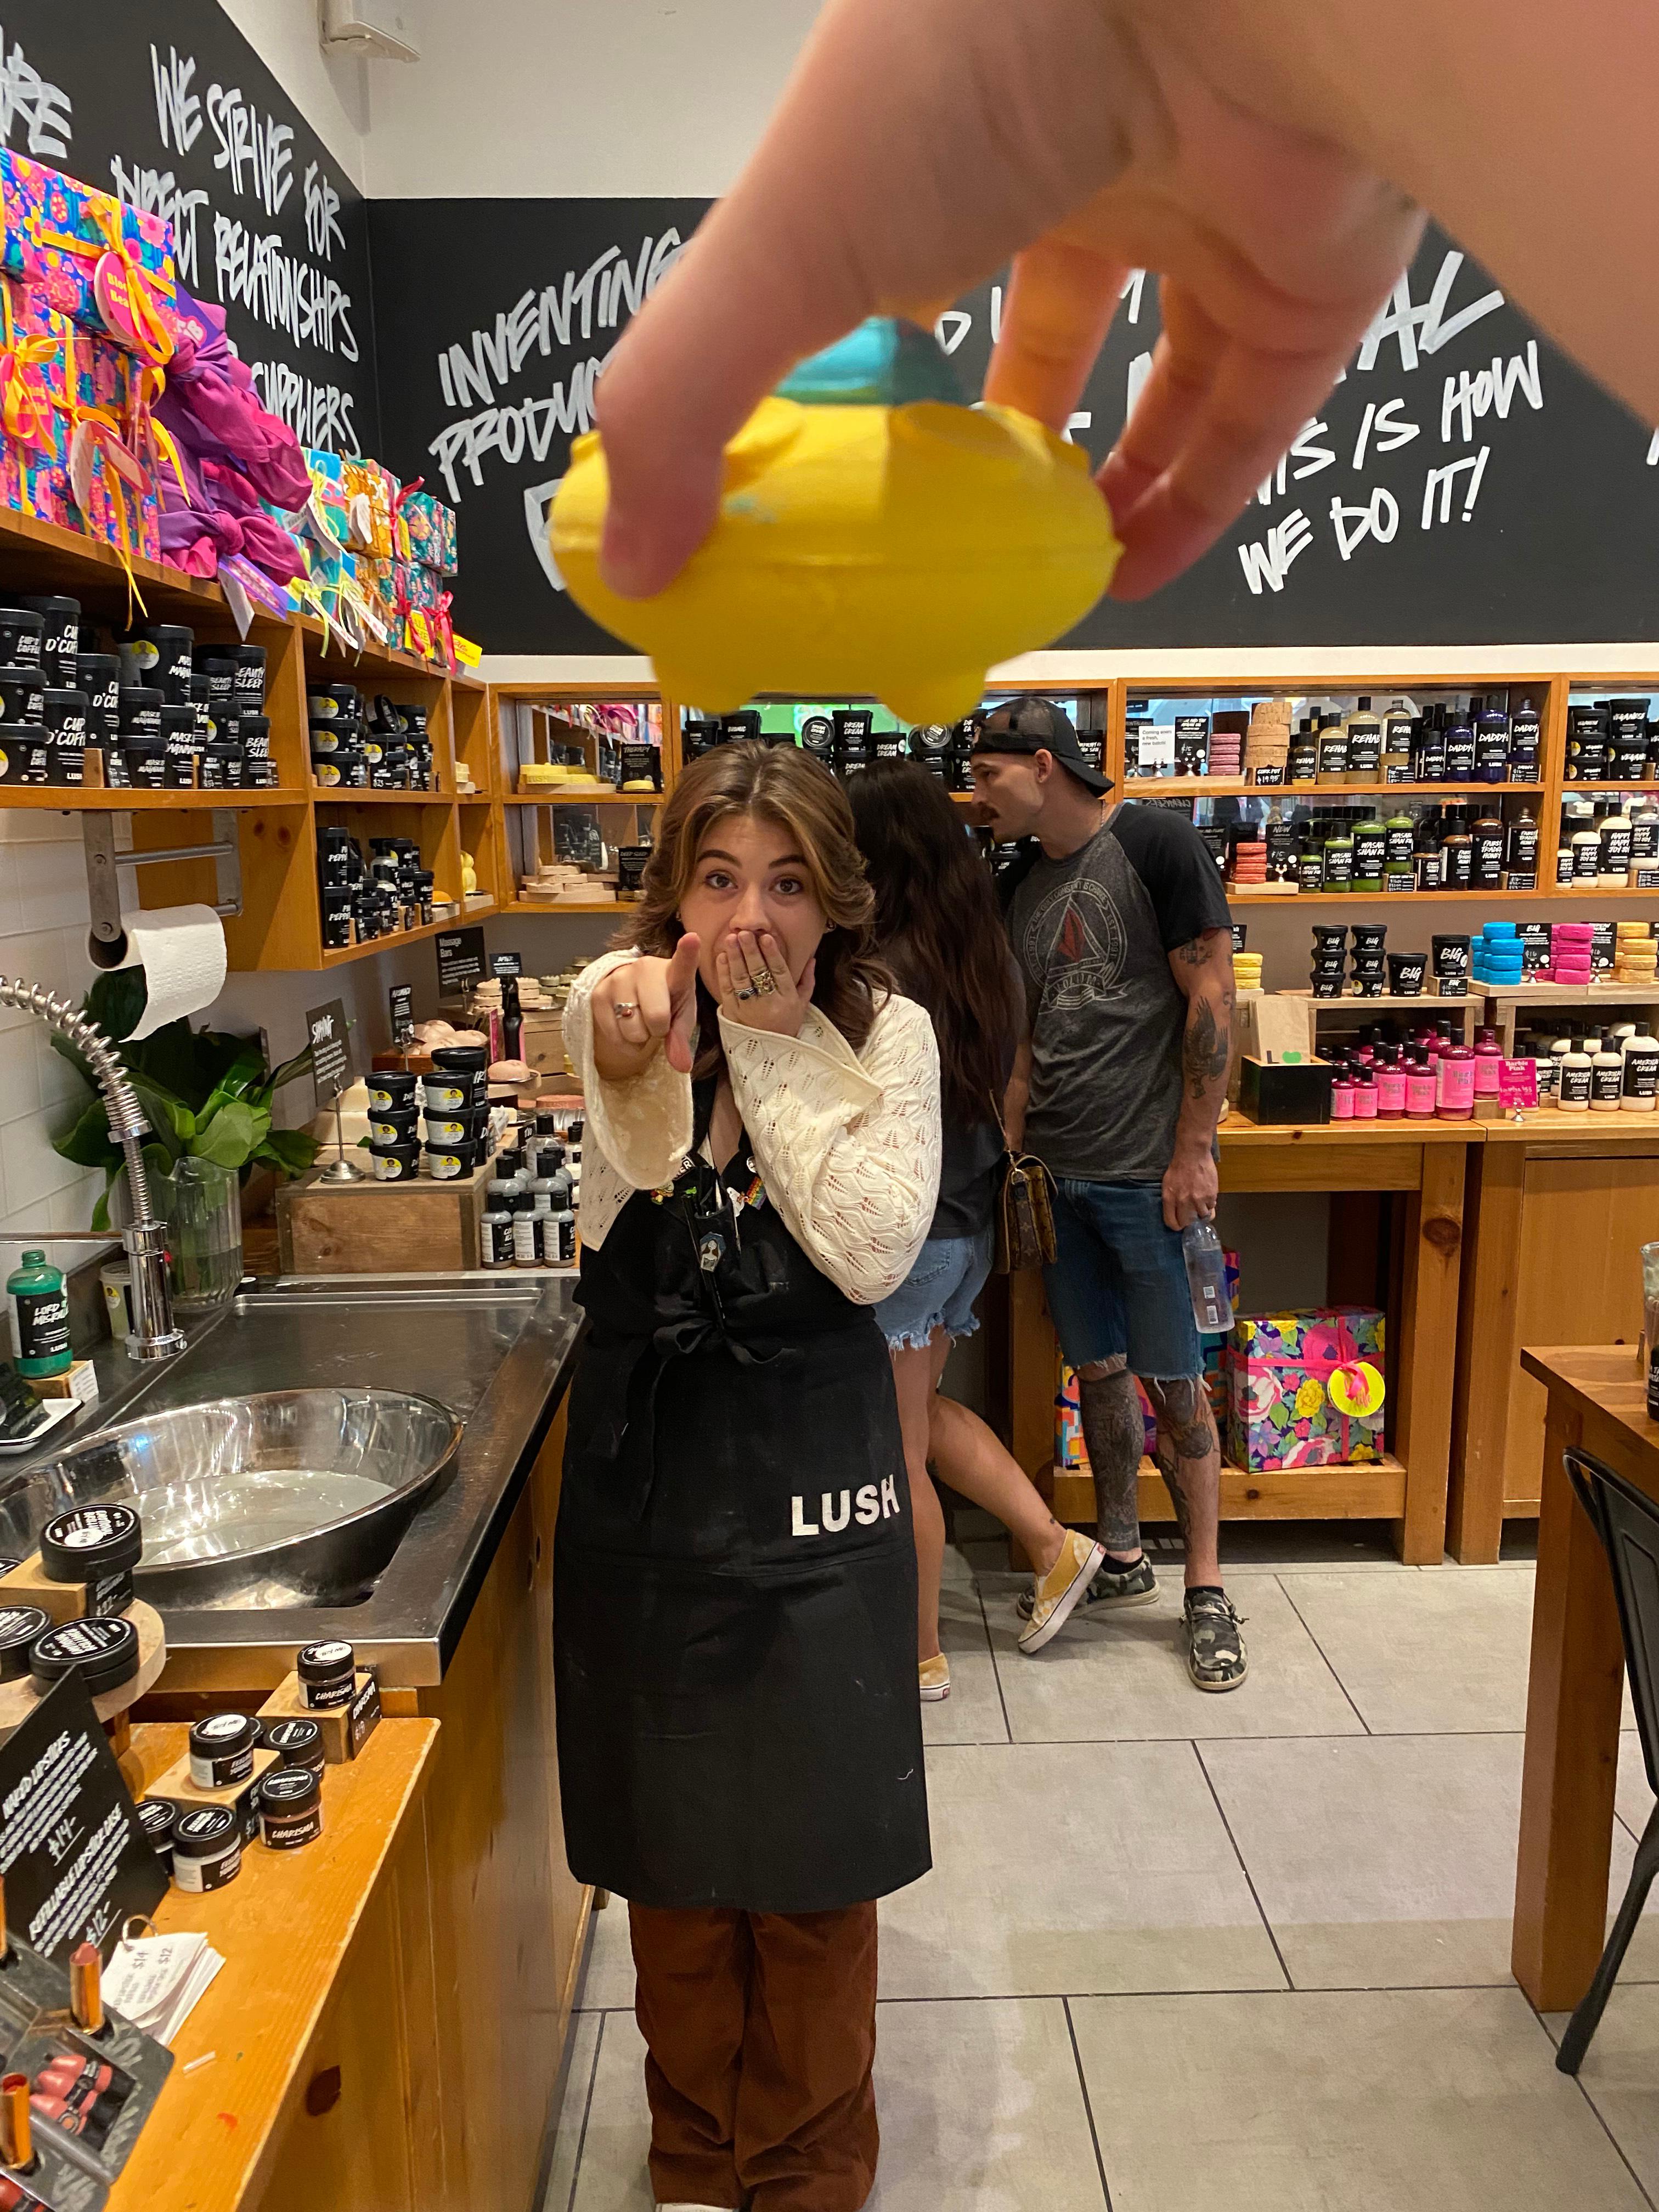 A UFO sighting at LUSH Polaris!!! come on in and see for yourself